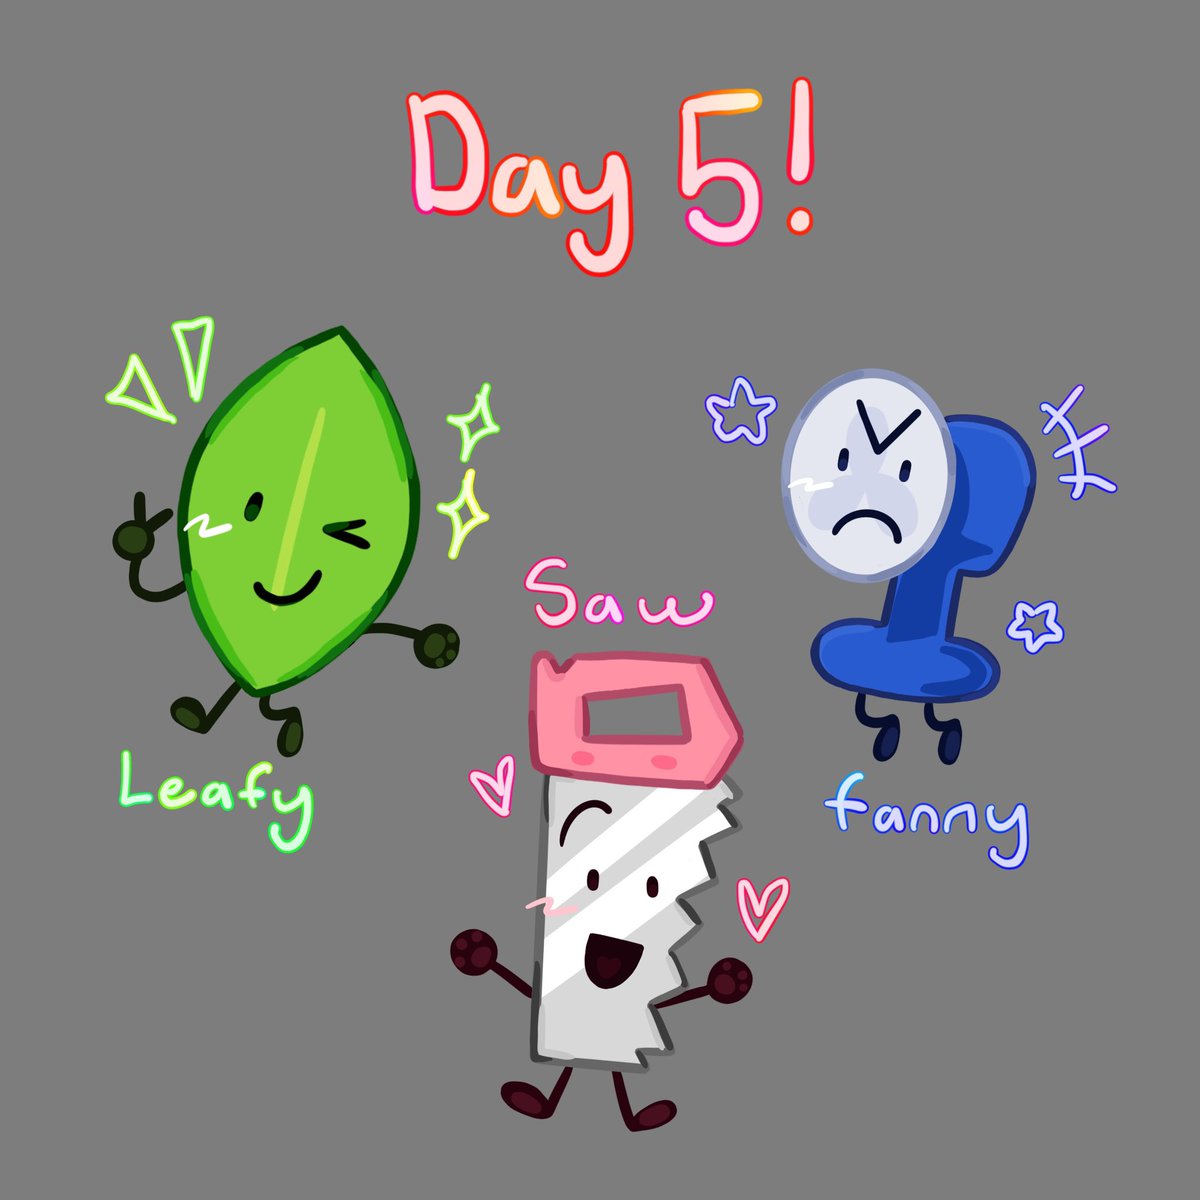 Day 5 - Fanny, Leafy, & Saw!!!

Drawing my favorite character from different object shows till the Bfdi x II meetup (But I started very late💀)

I can’t choose which Bfdi character is my favorite so u guys get all 3! Very excited for tomorrow yippee!!! #BFB #bfdi #osc #tpot